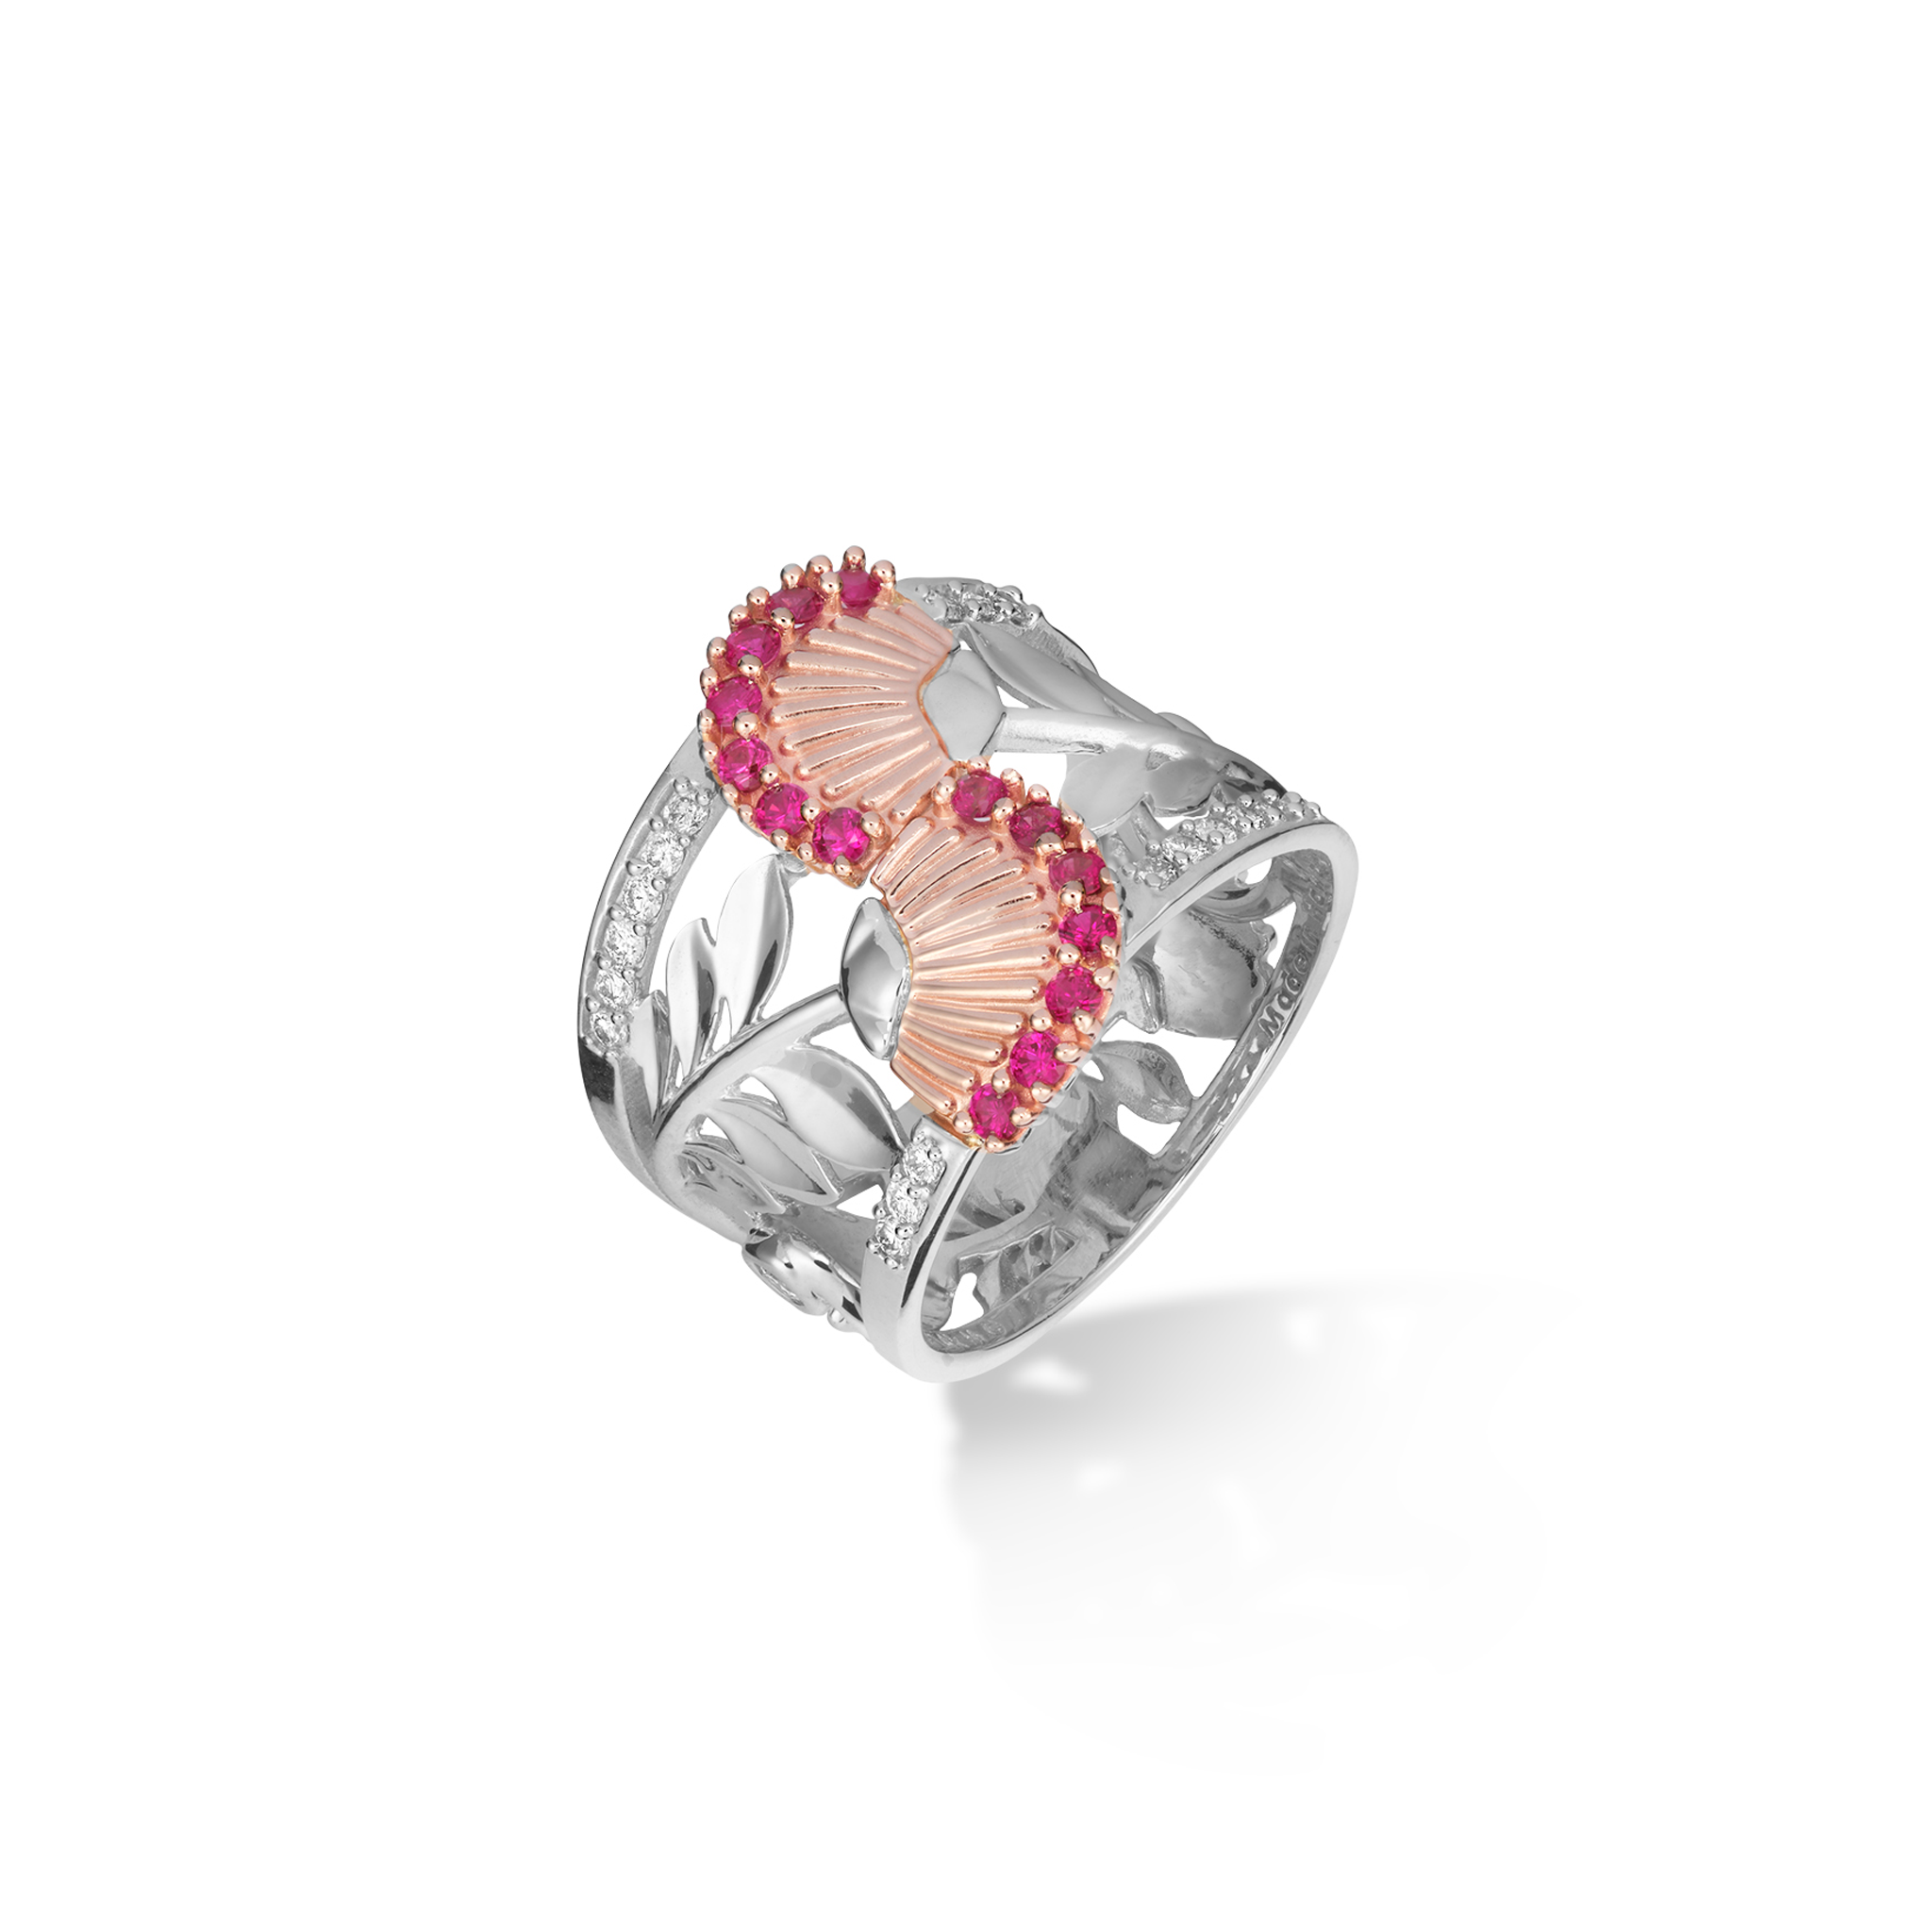 ʻŌhiʻa Lehua Ruby Ring in Two Tone Gold with Diamonds